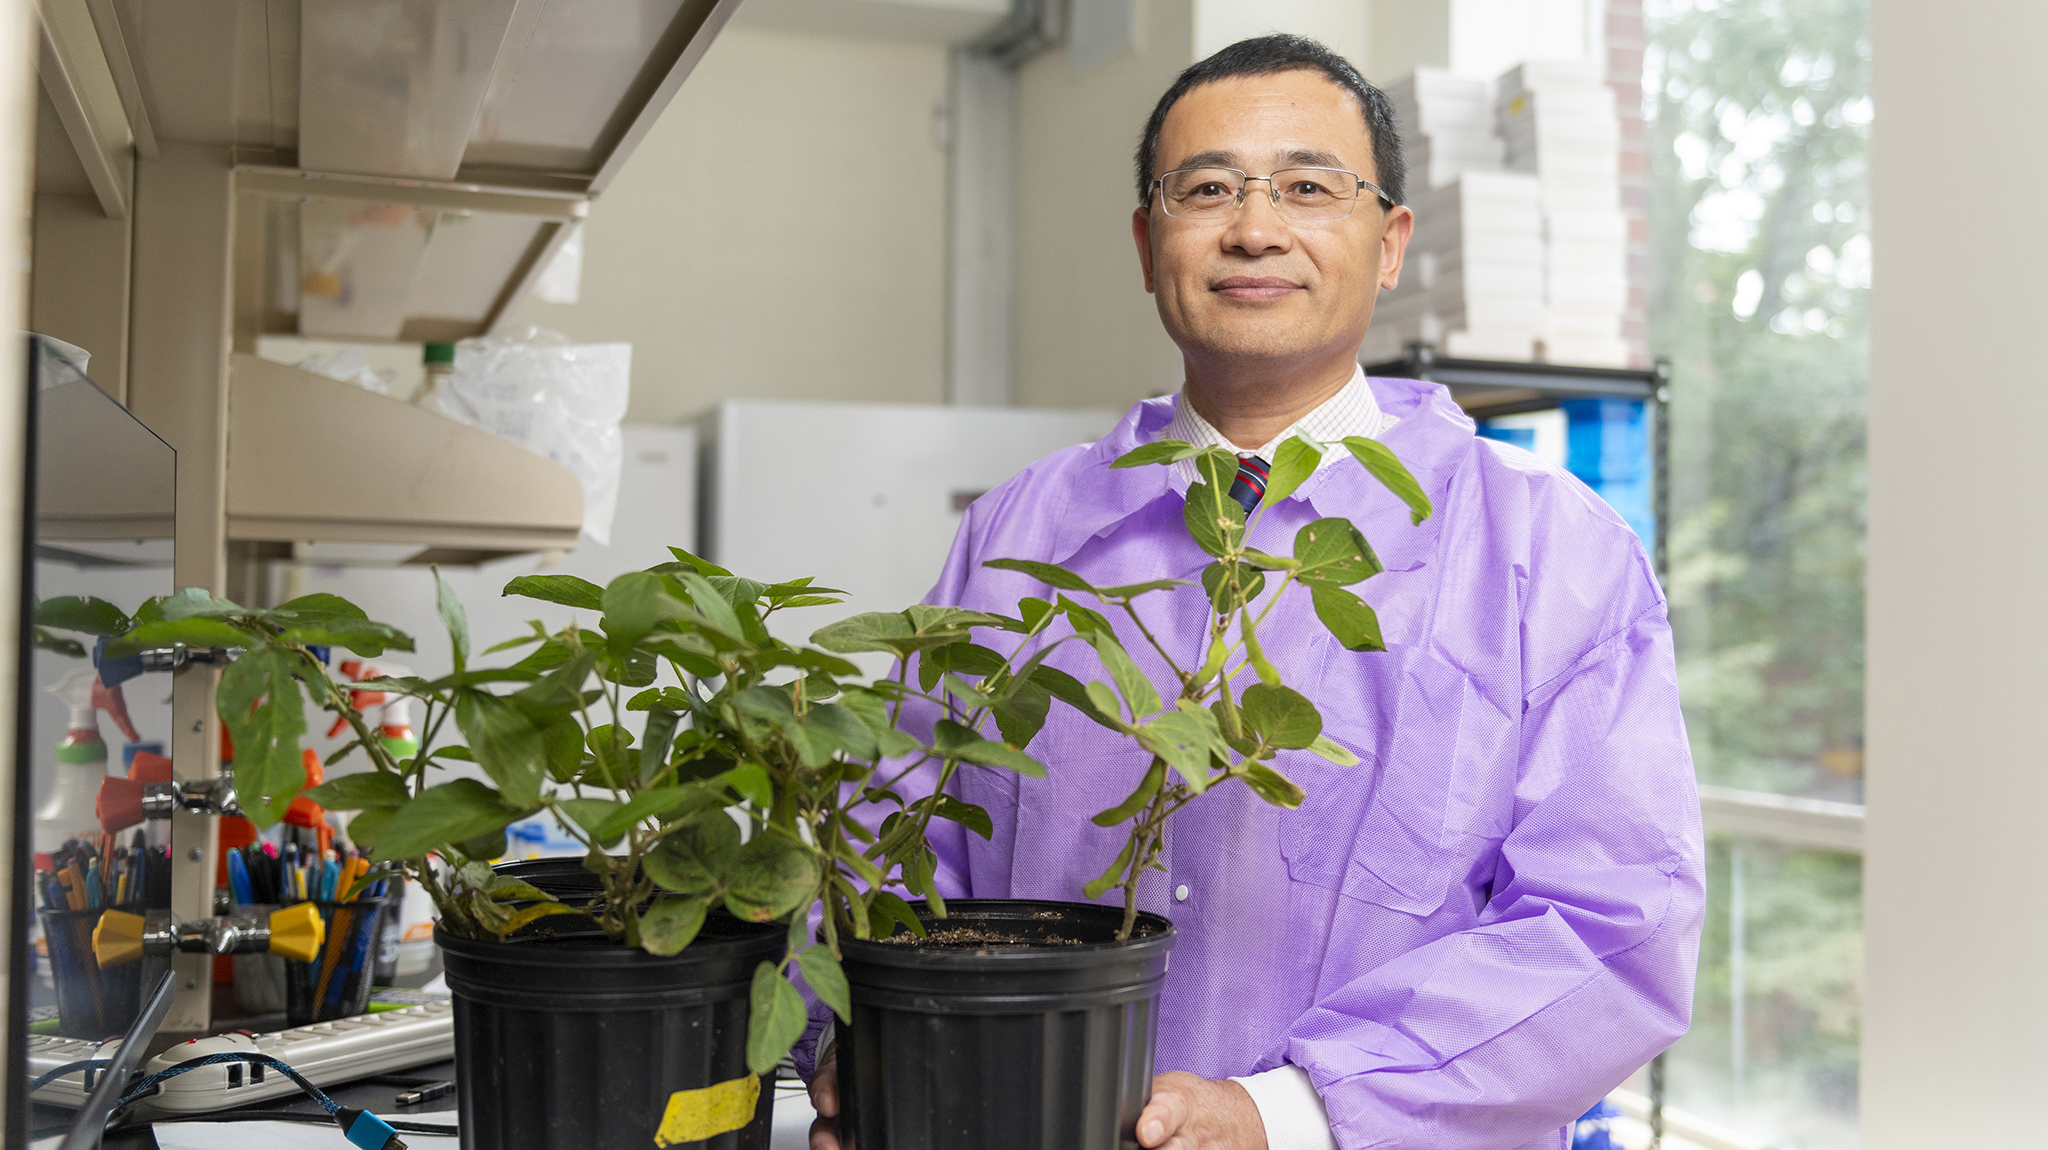 UM biologist Sixue Chen is collaborating with researchers nationwide to combat a microscopic roundworm that causes up to 50% of a soybean crop’s yield loss. The project has huge implications for Mississippi farmers, who depend heavily on soybeans. Photo by Srijita Chattopadhyay/Ole Miss Digital Imaging Services